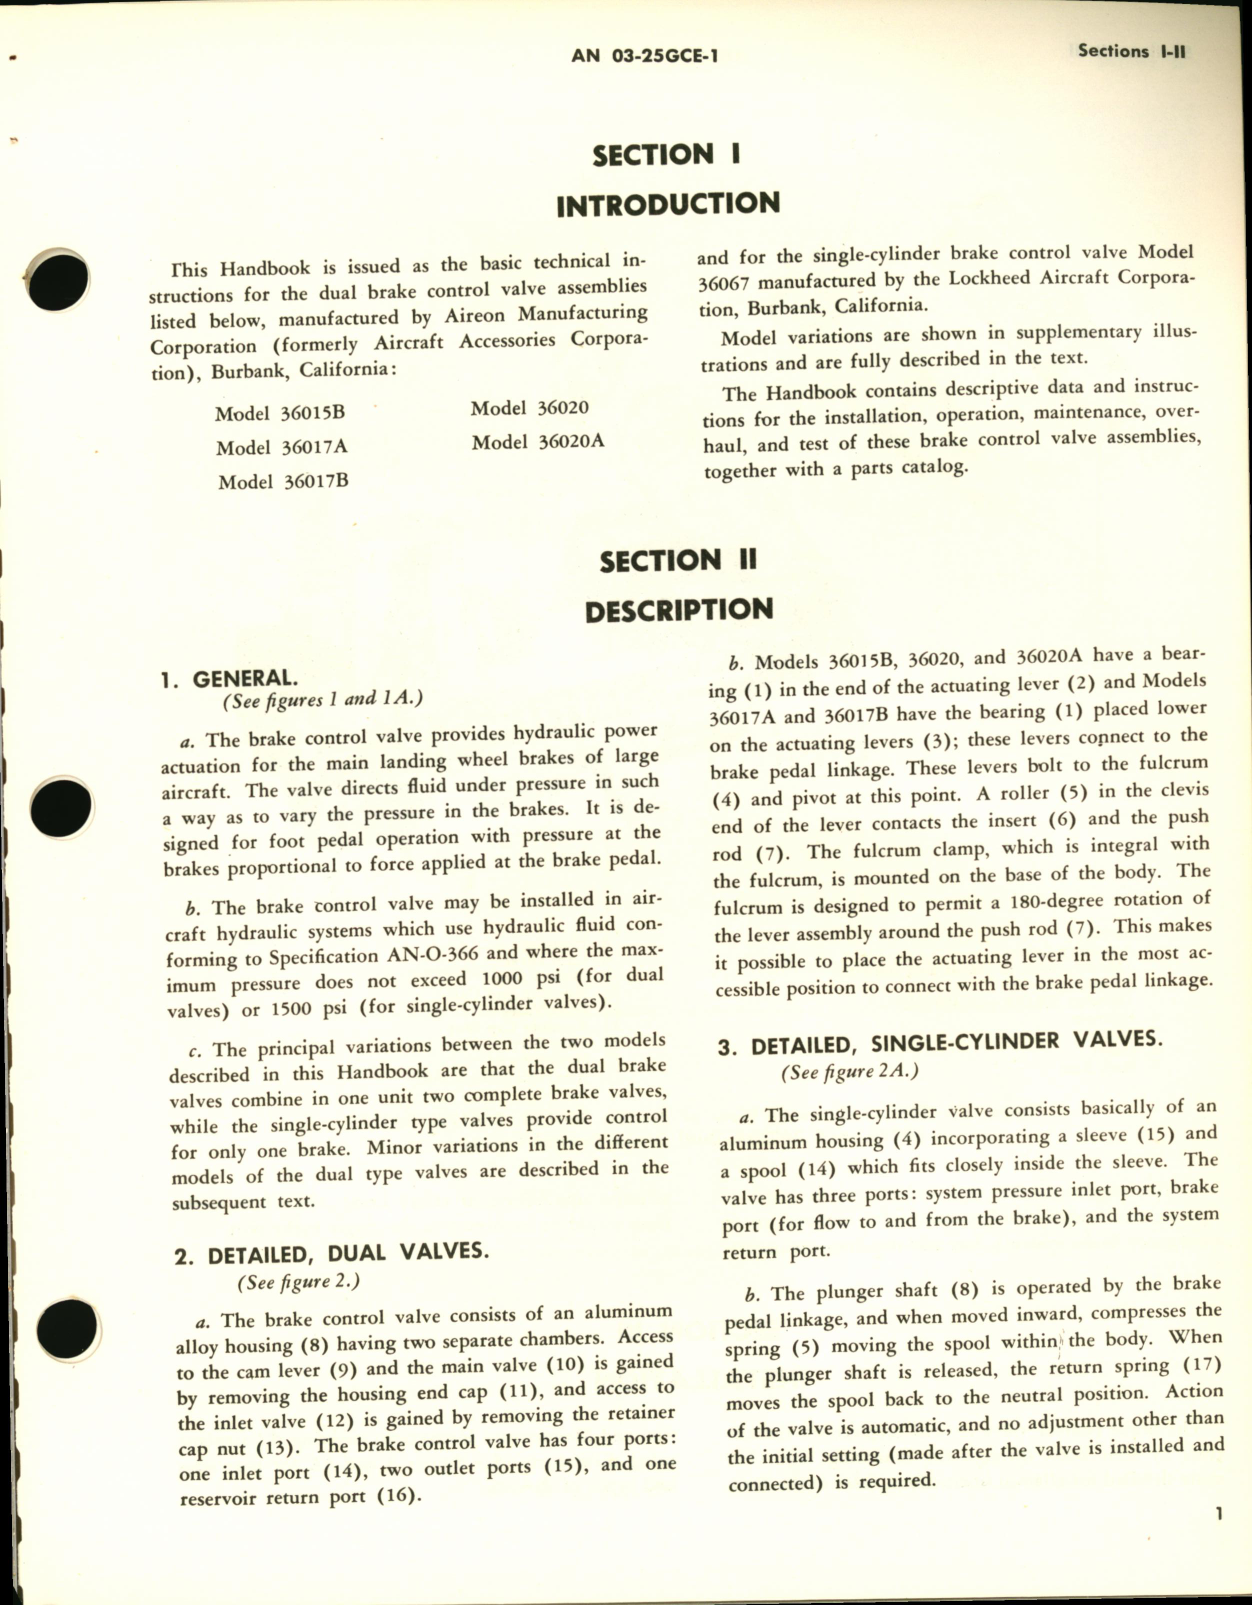 Sample page 7 from AirCorps Library document: Operation, Service, & Overhaul Instructions with Parts Catalog for Brake Control Valves